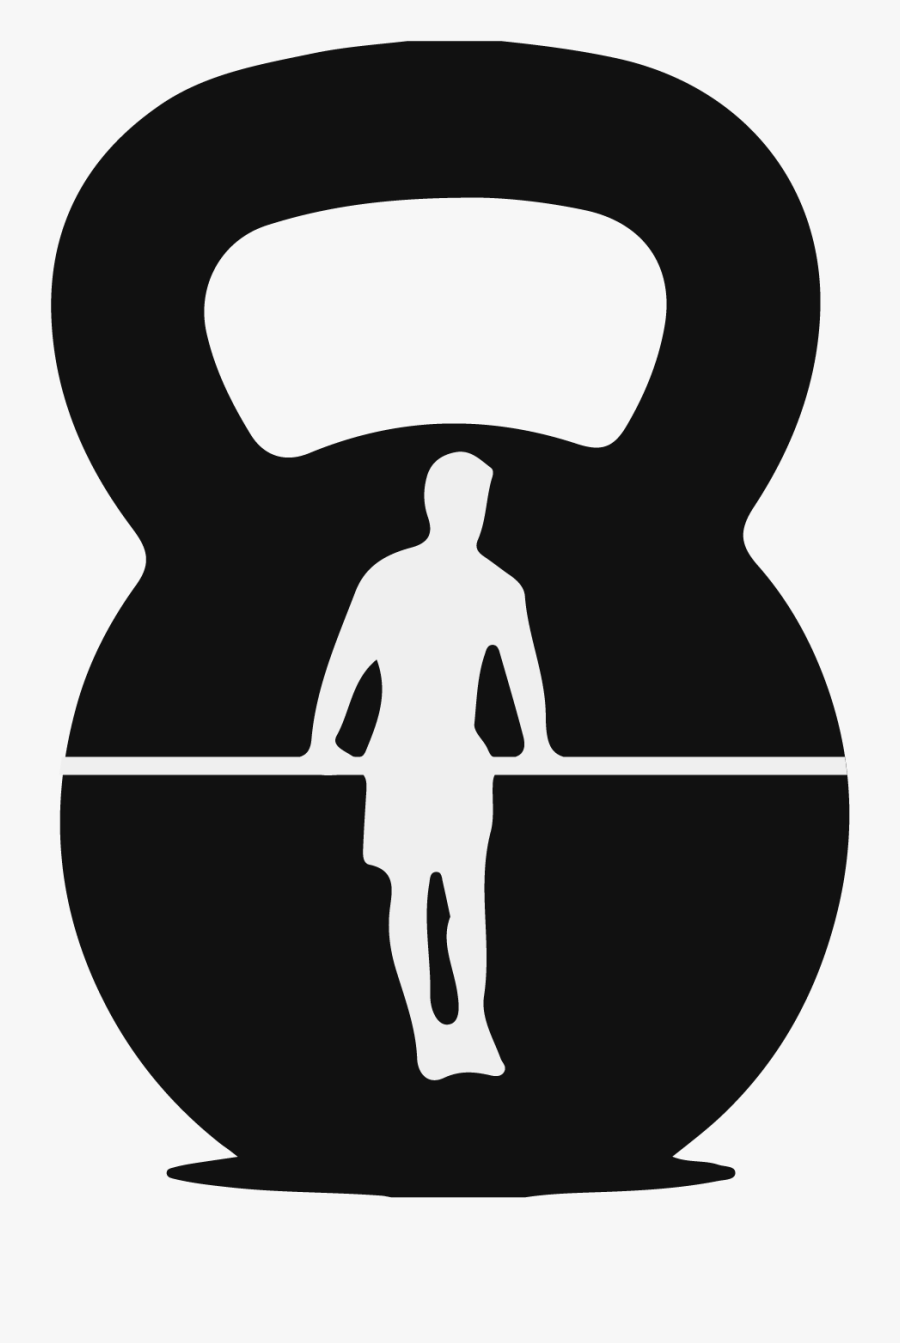 Silhouette At Getdrawings Com - Crossfit Silhouettes Vectors, Transparent Clipart